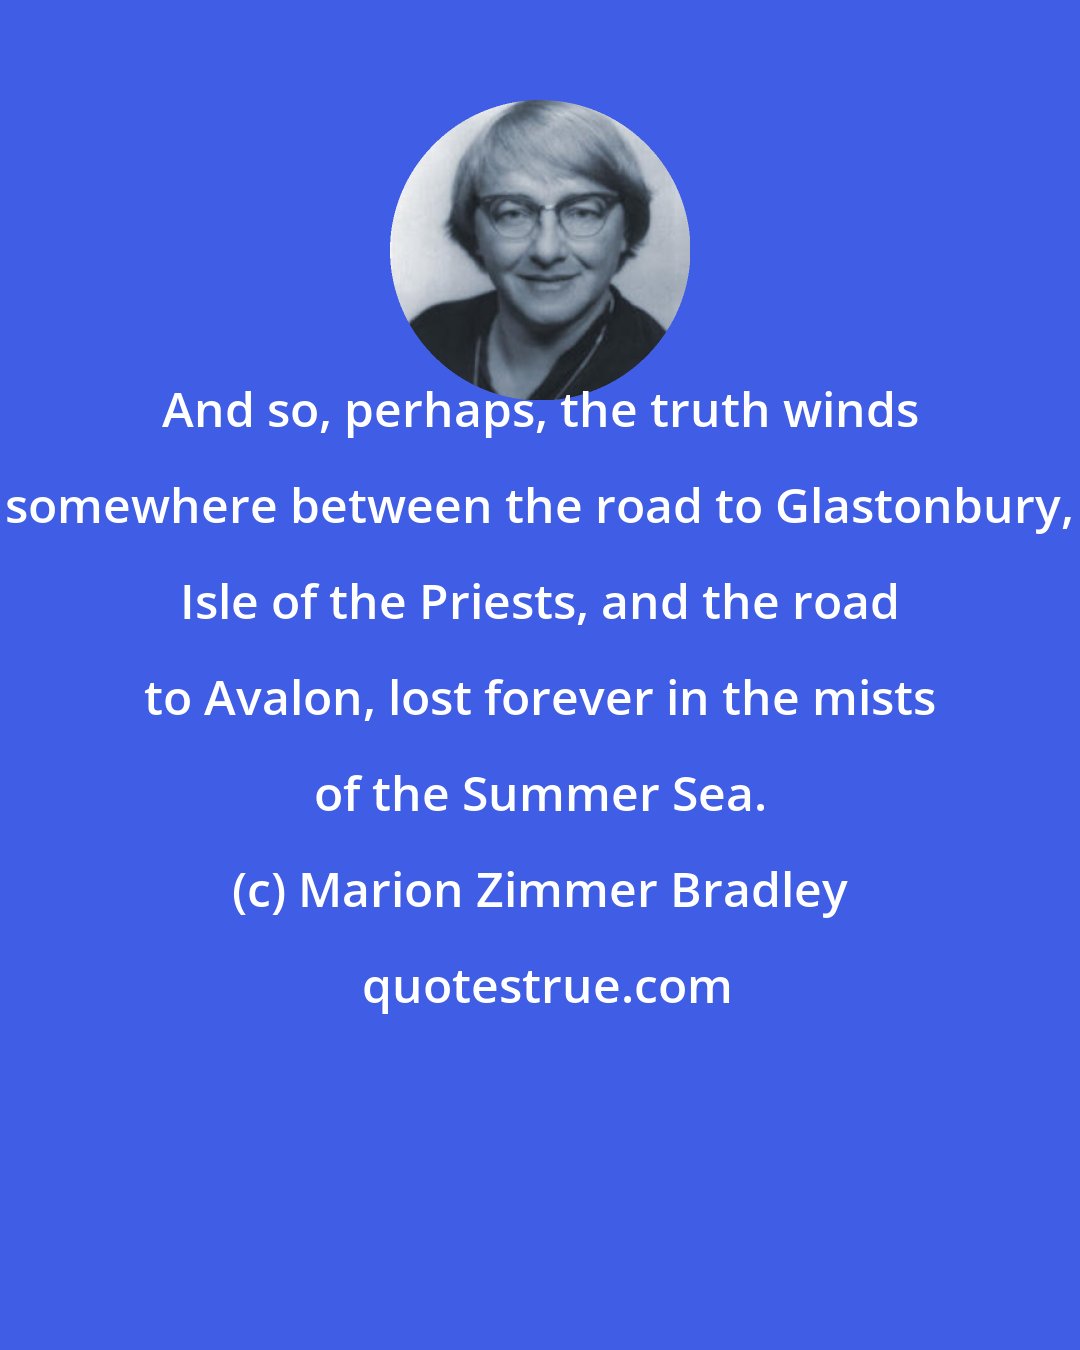 Marion Zimmer Bradley: And so, perhaps, the truth winds somewhere between the road to Glastonbury, Isle of the Priests, and the road to Avalon, lost forever in the mists of the Summer Sea.